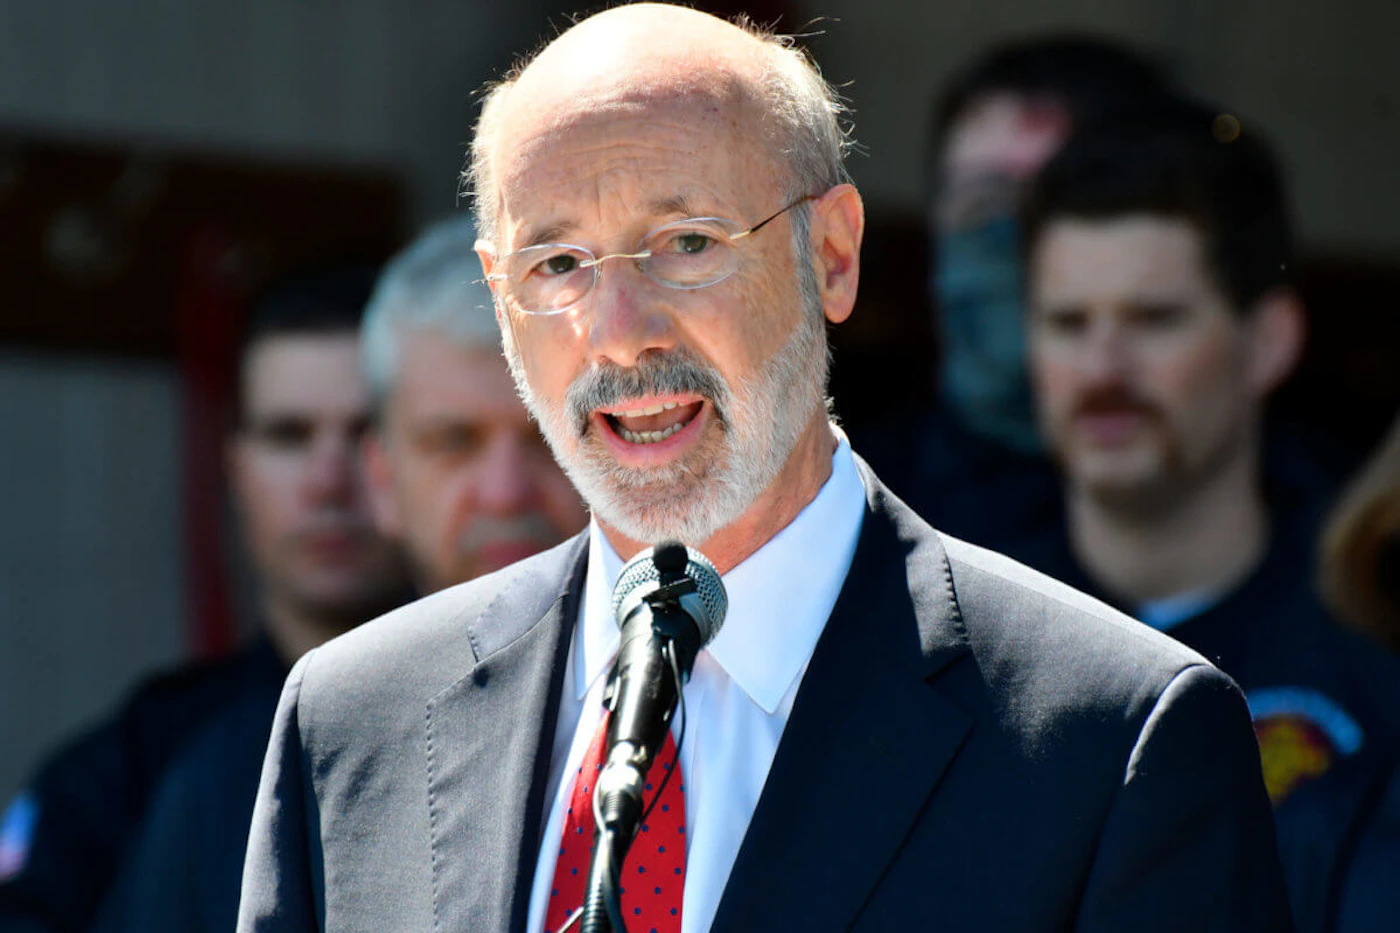 Gov. Tom Wolf speaks at an event in Mechanicsburg, Pa. (AP Photo/Marc Levy)